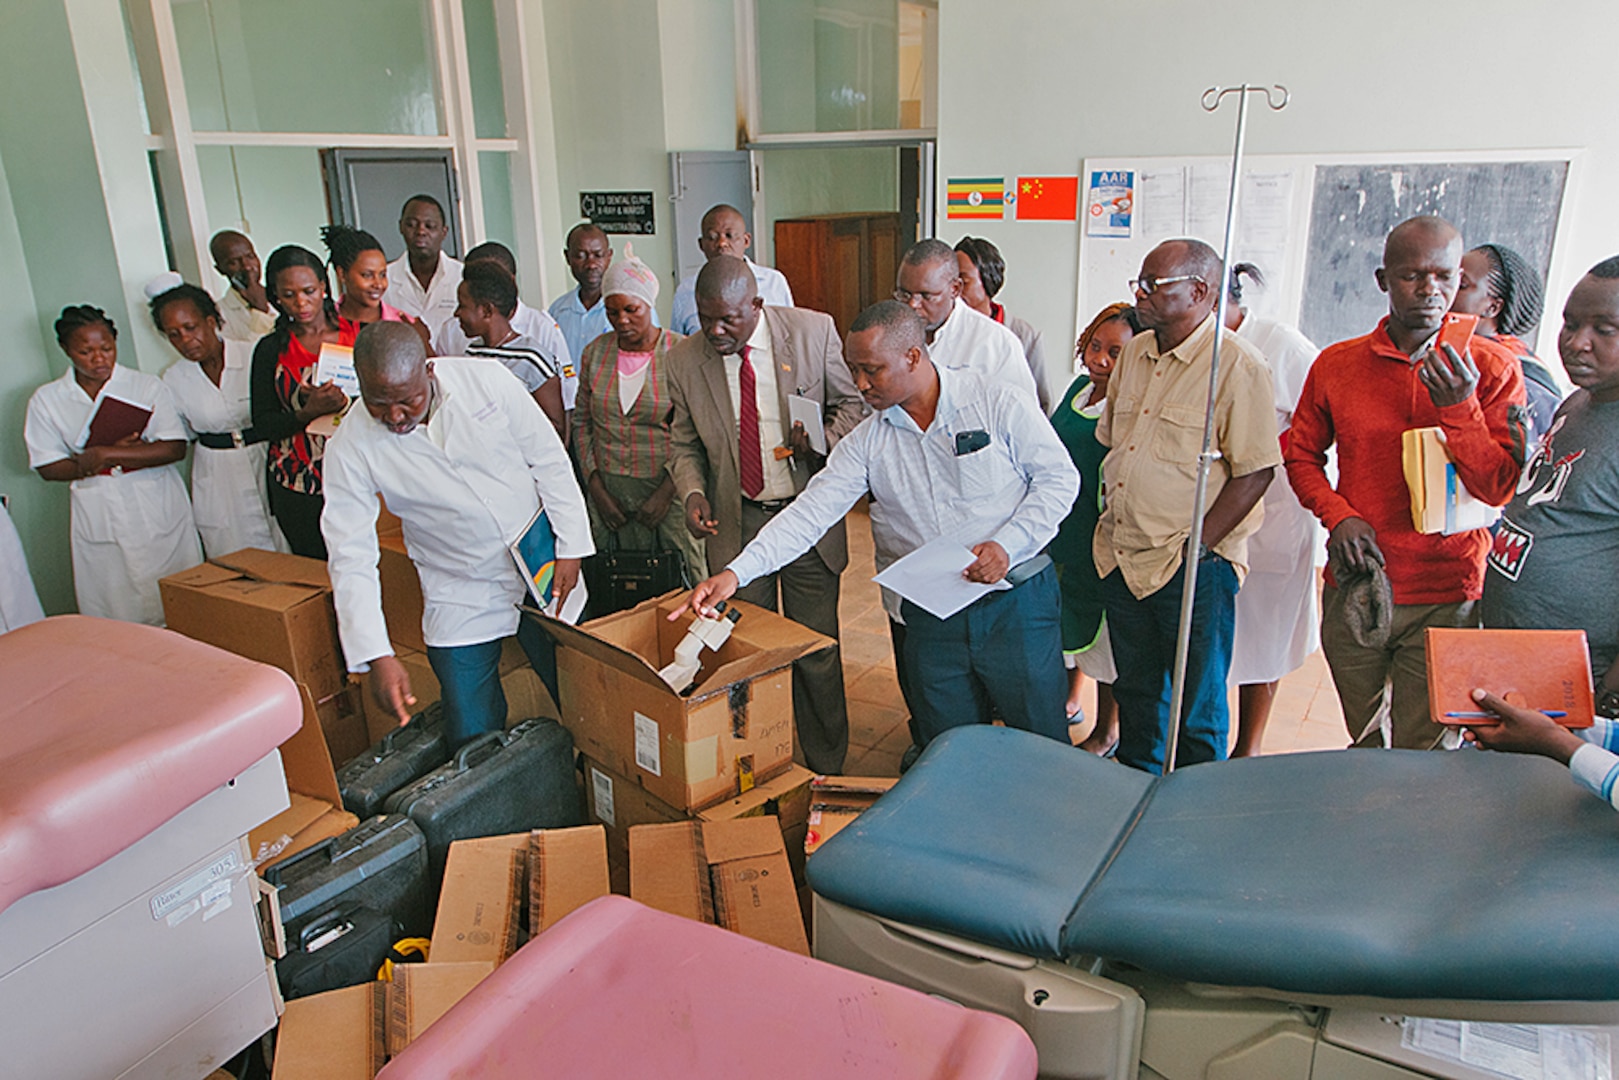 Doctors look at donated equipment